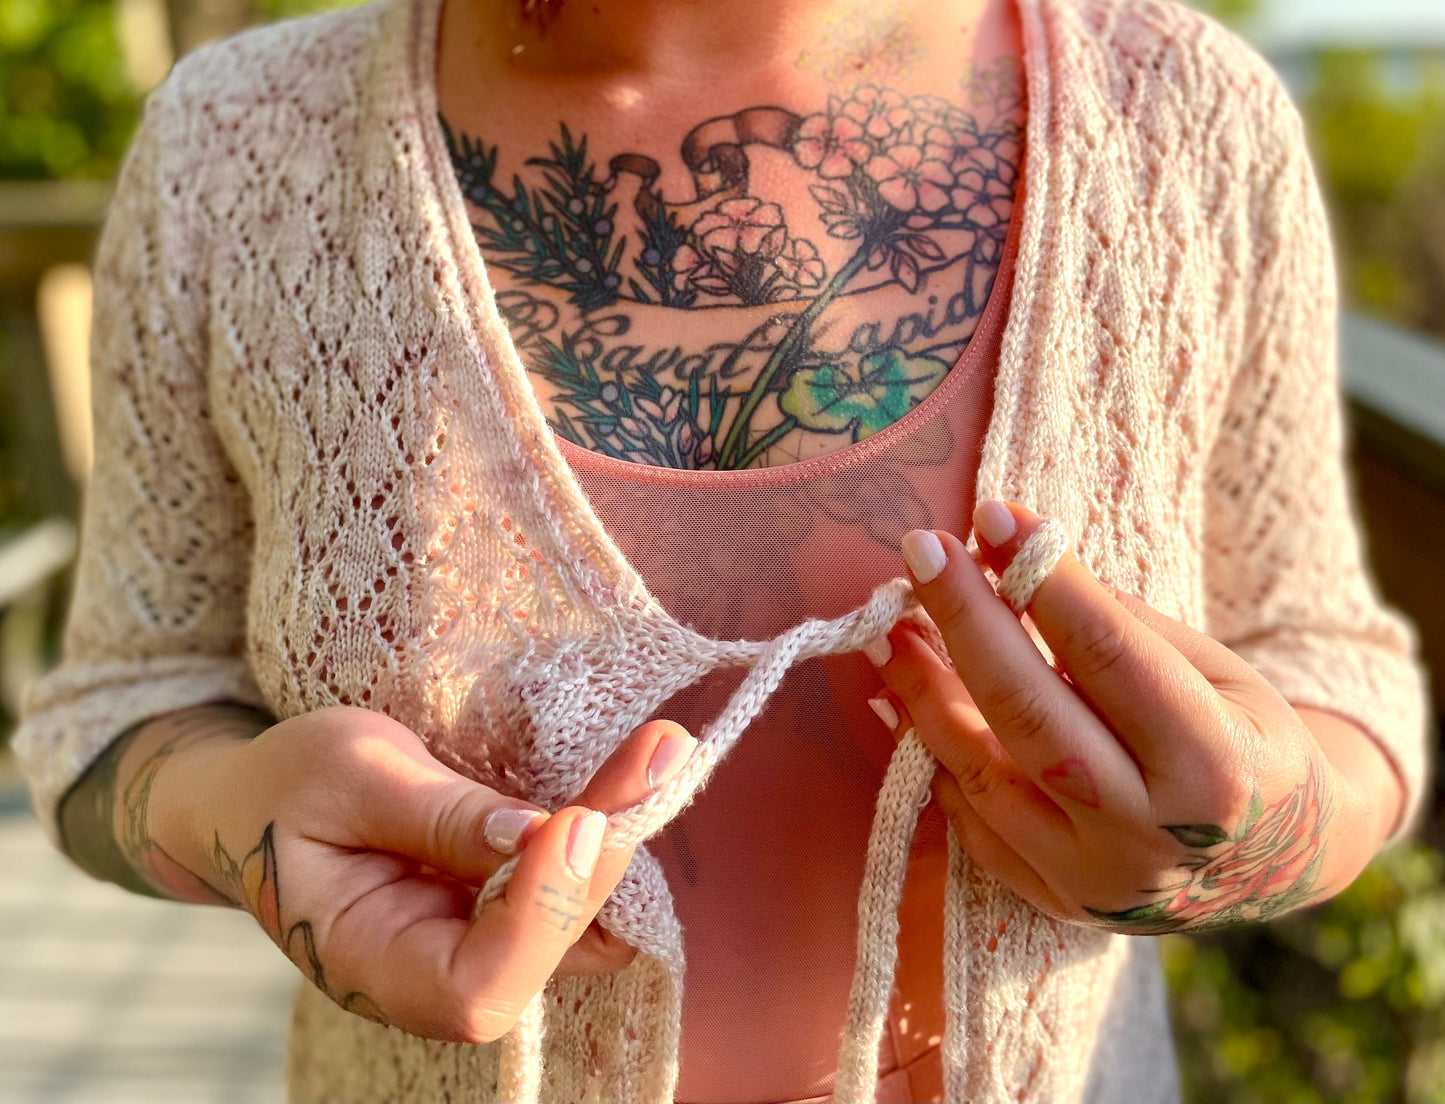 Seen close up, Bess wears a white cardigan knit in a delicate lace stitch. She ties the front strings over a light pink tank.